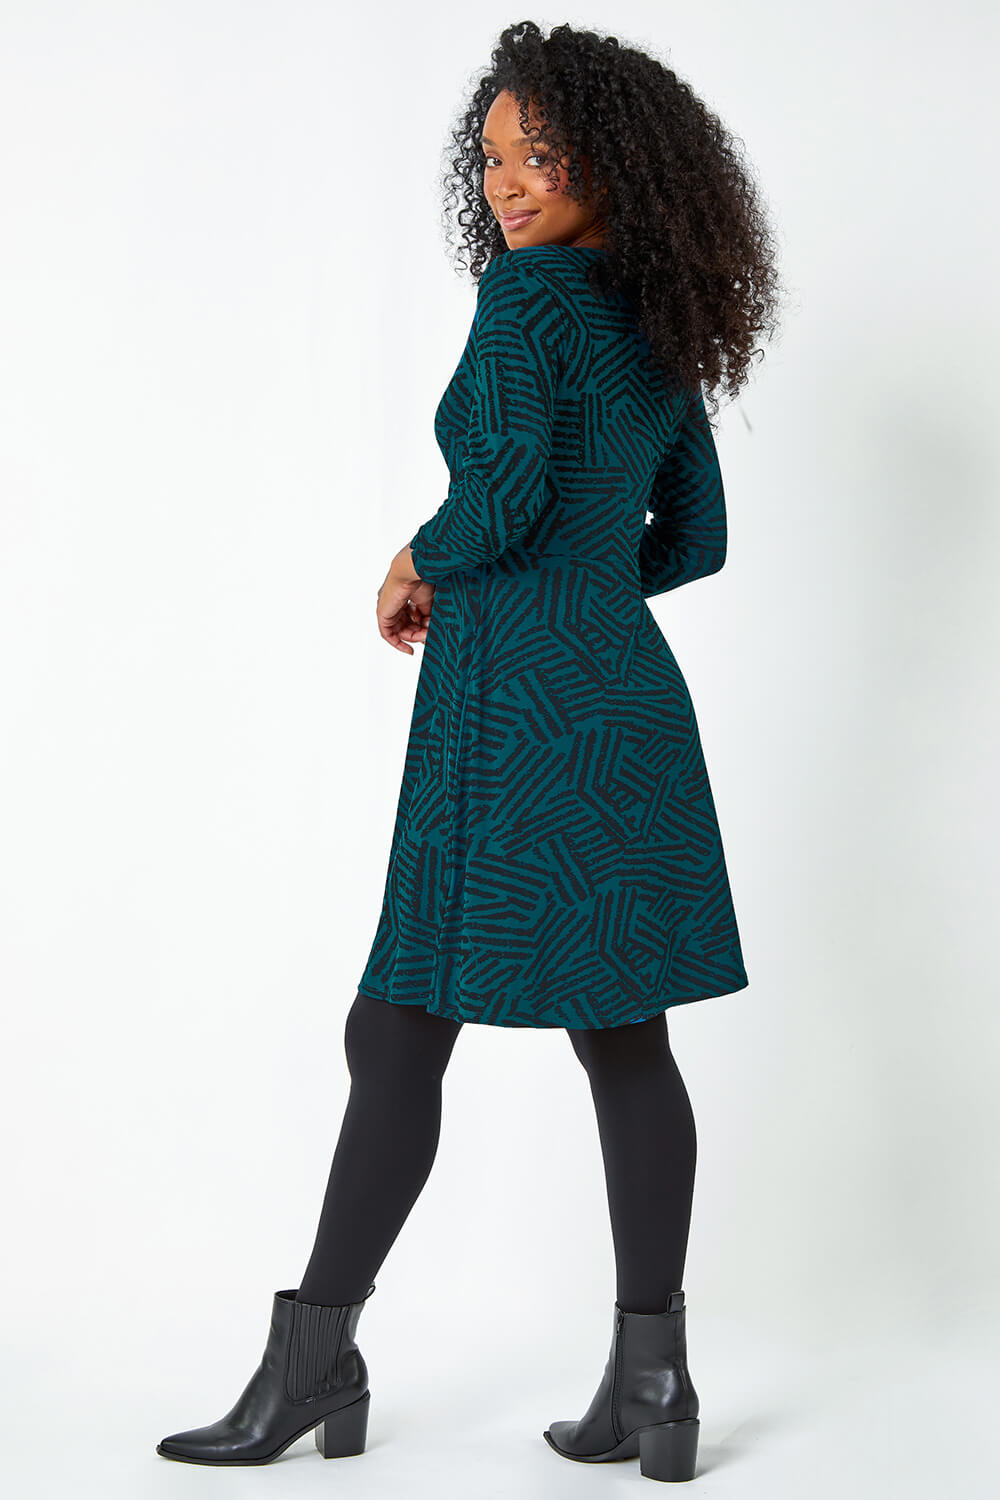 Teal Petite Mock Wrap Abstract Stretch Dress, Image 3 of 5